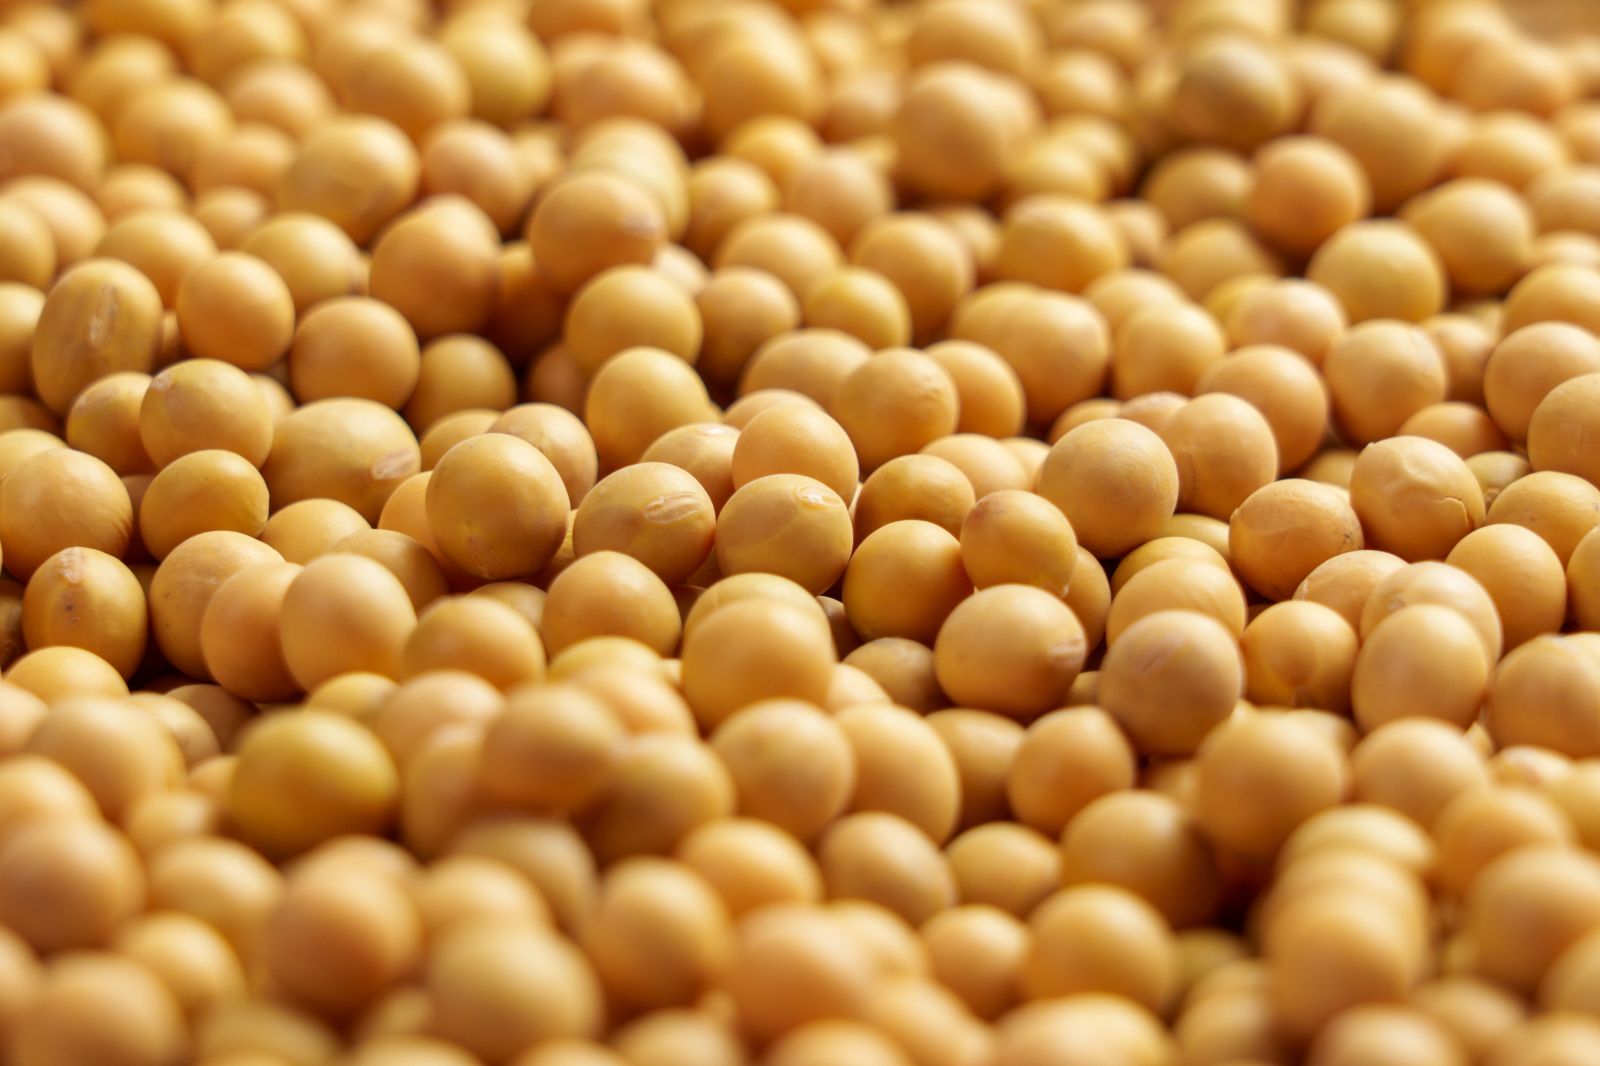 Pile of soybeans by PAVEL IARUNICHEV via iStock